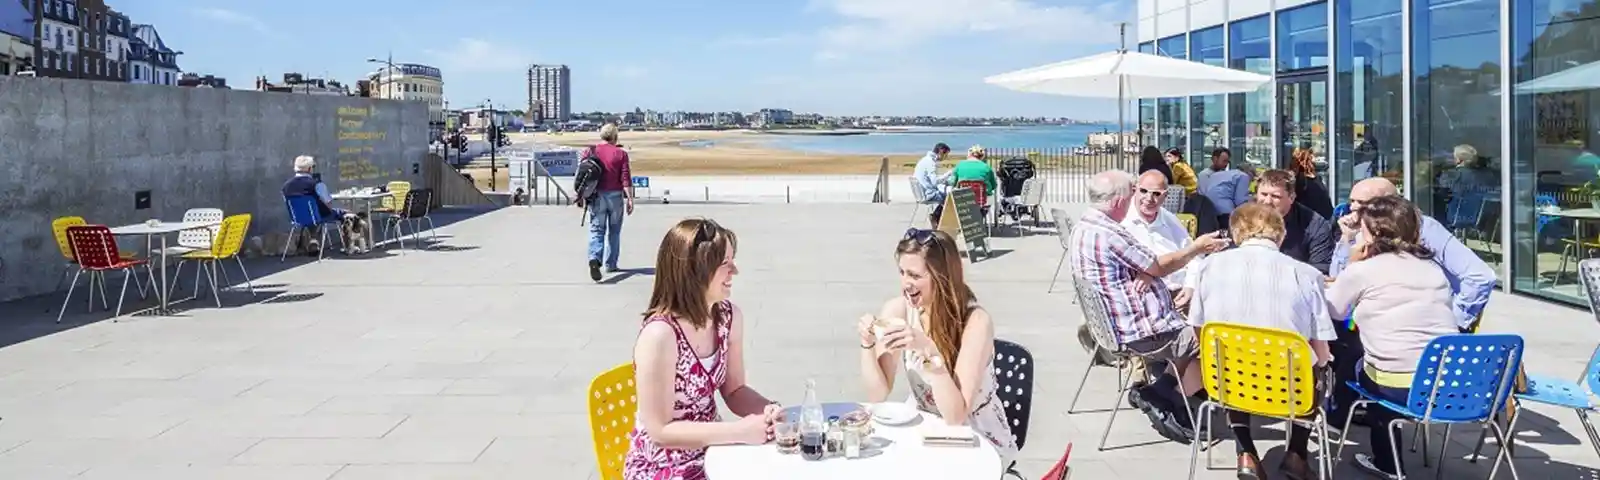 Turner Contemporary Cafe with Margate Main Sands in background.jpg